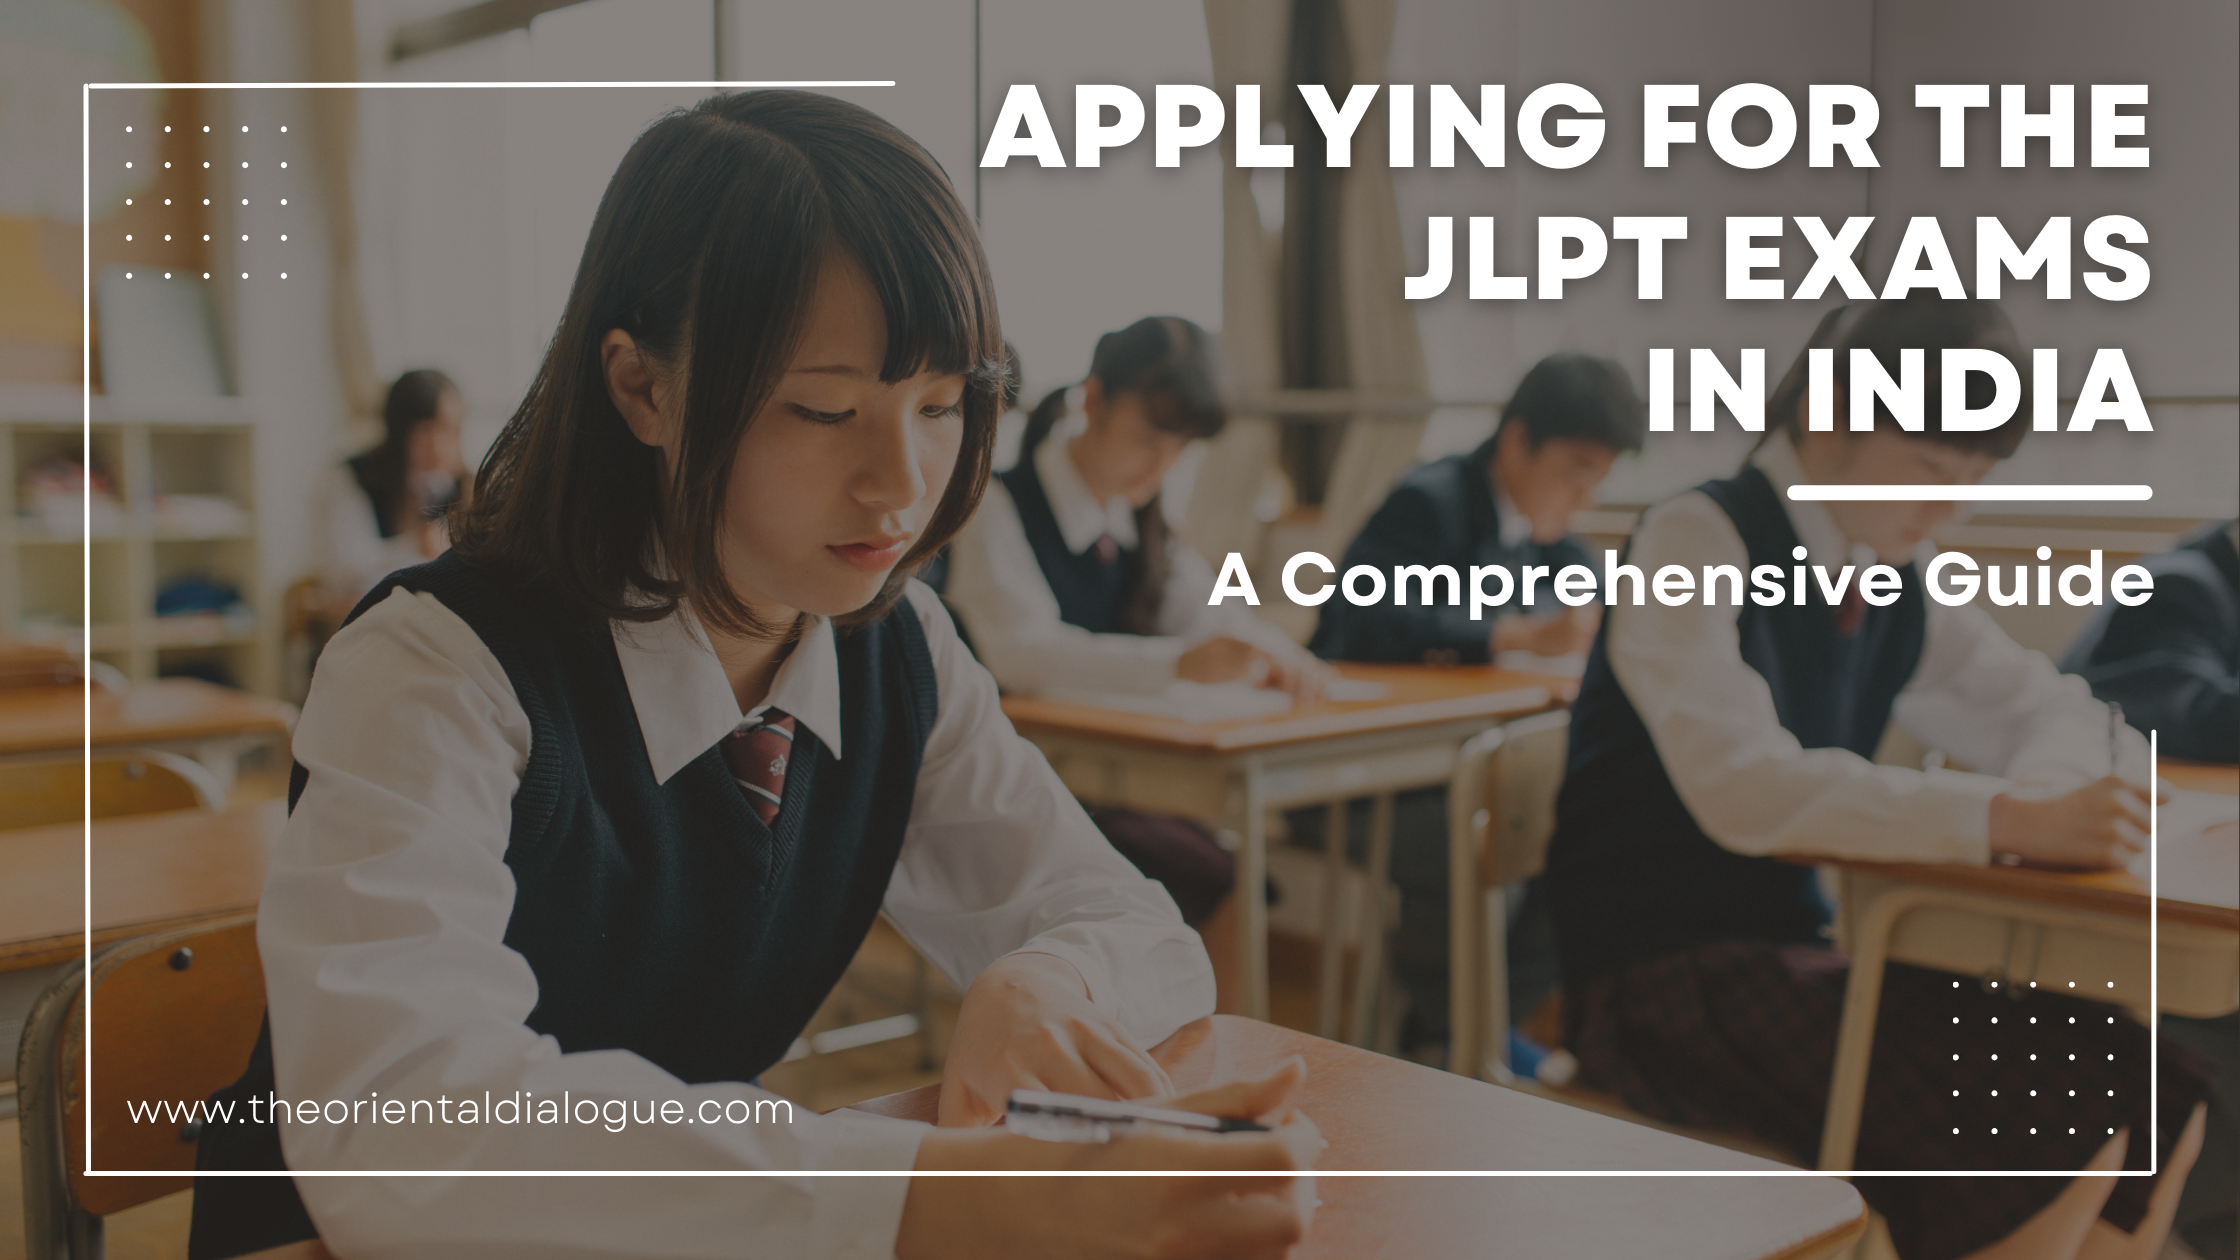 How to Apply for JLPT Exams in India: A Comprehensive Guide